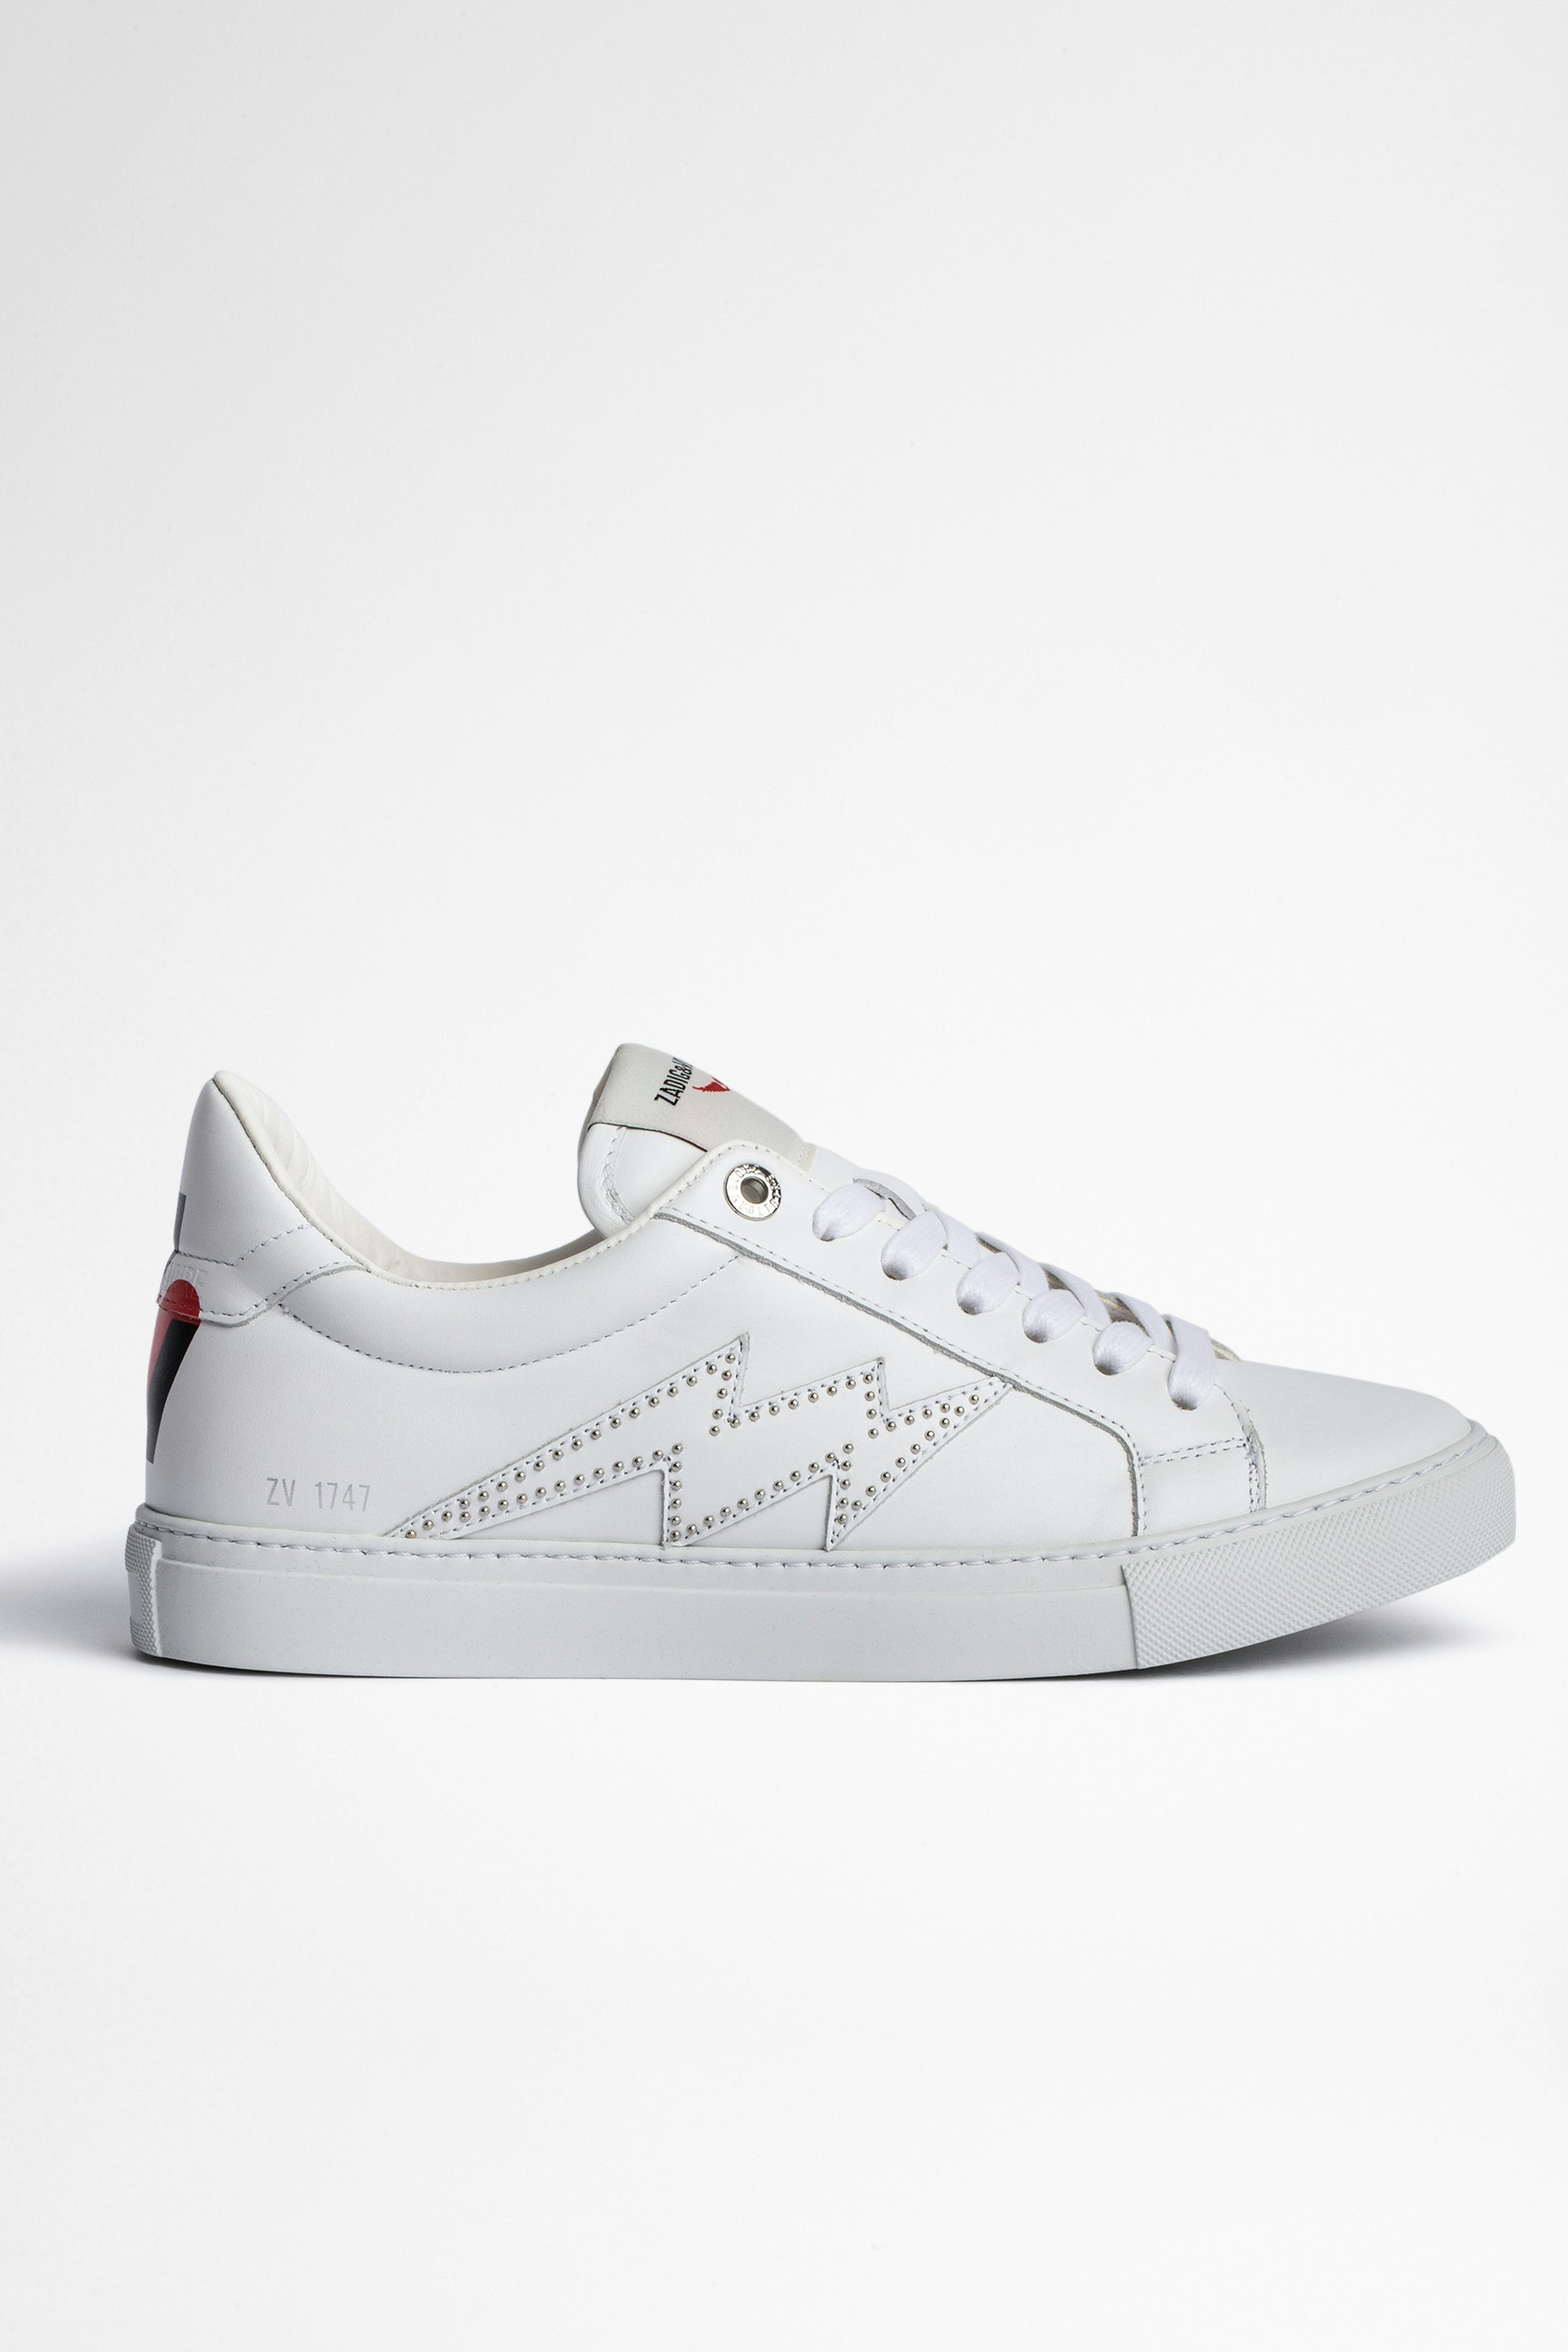 ZV1747 レザースニーカー Women's smooth white leather trainers with ZV heart print on back